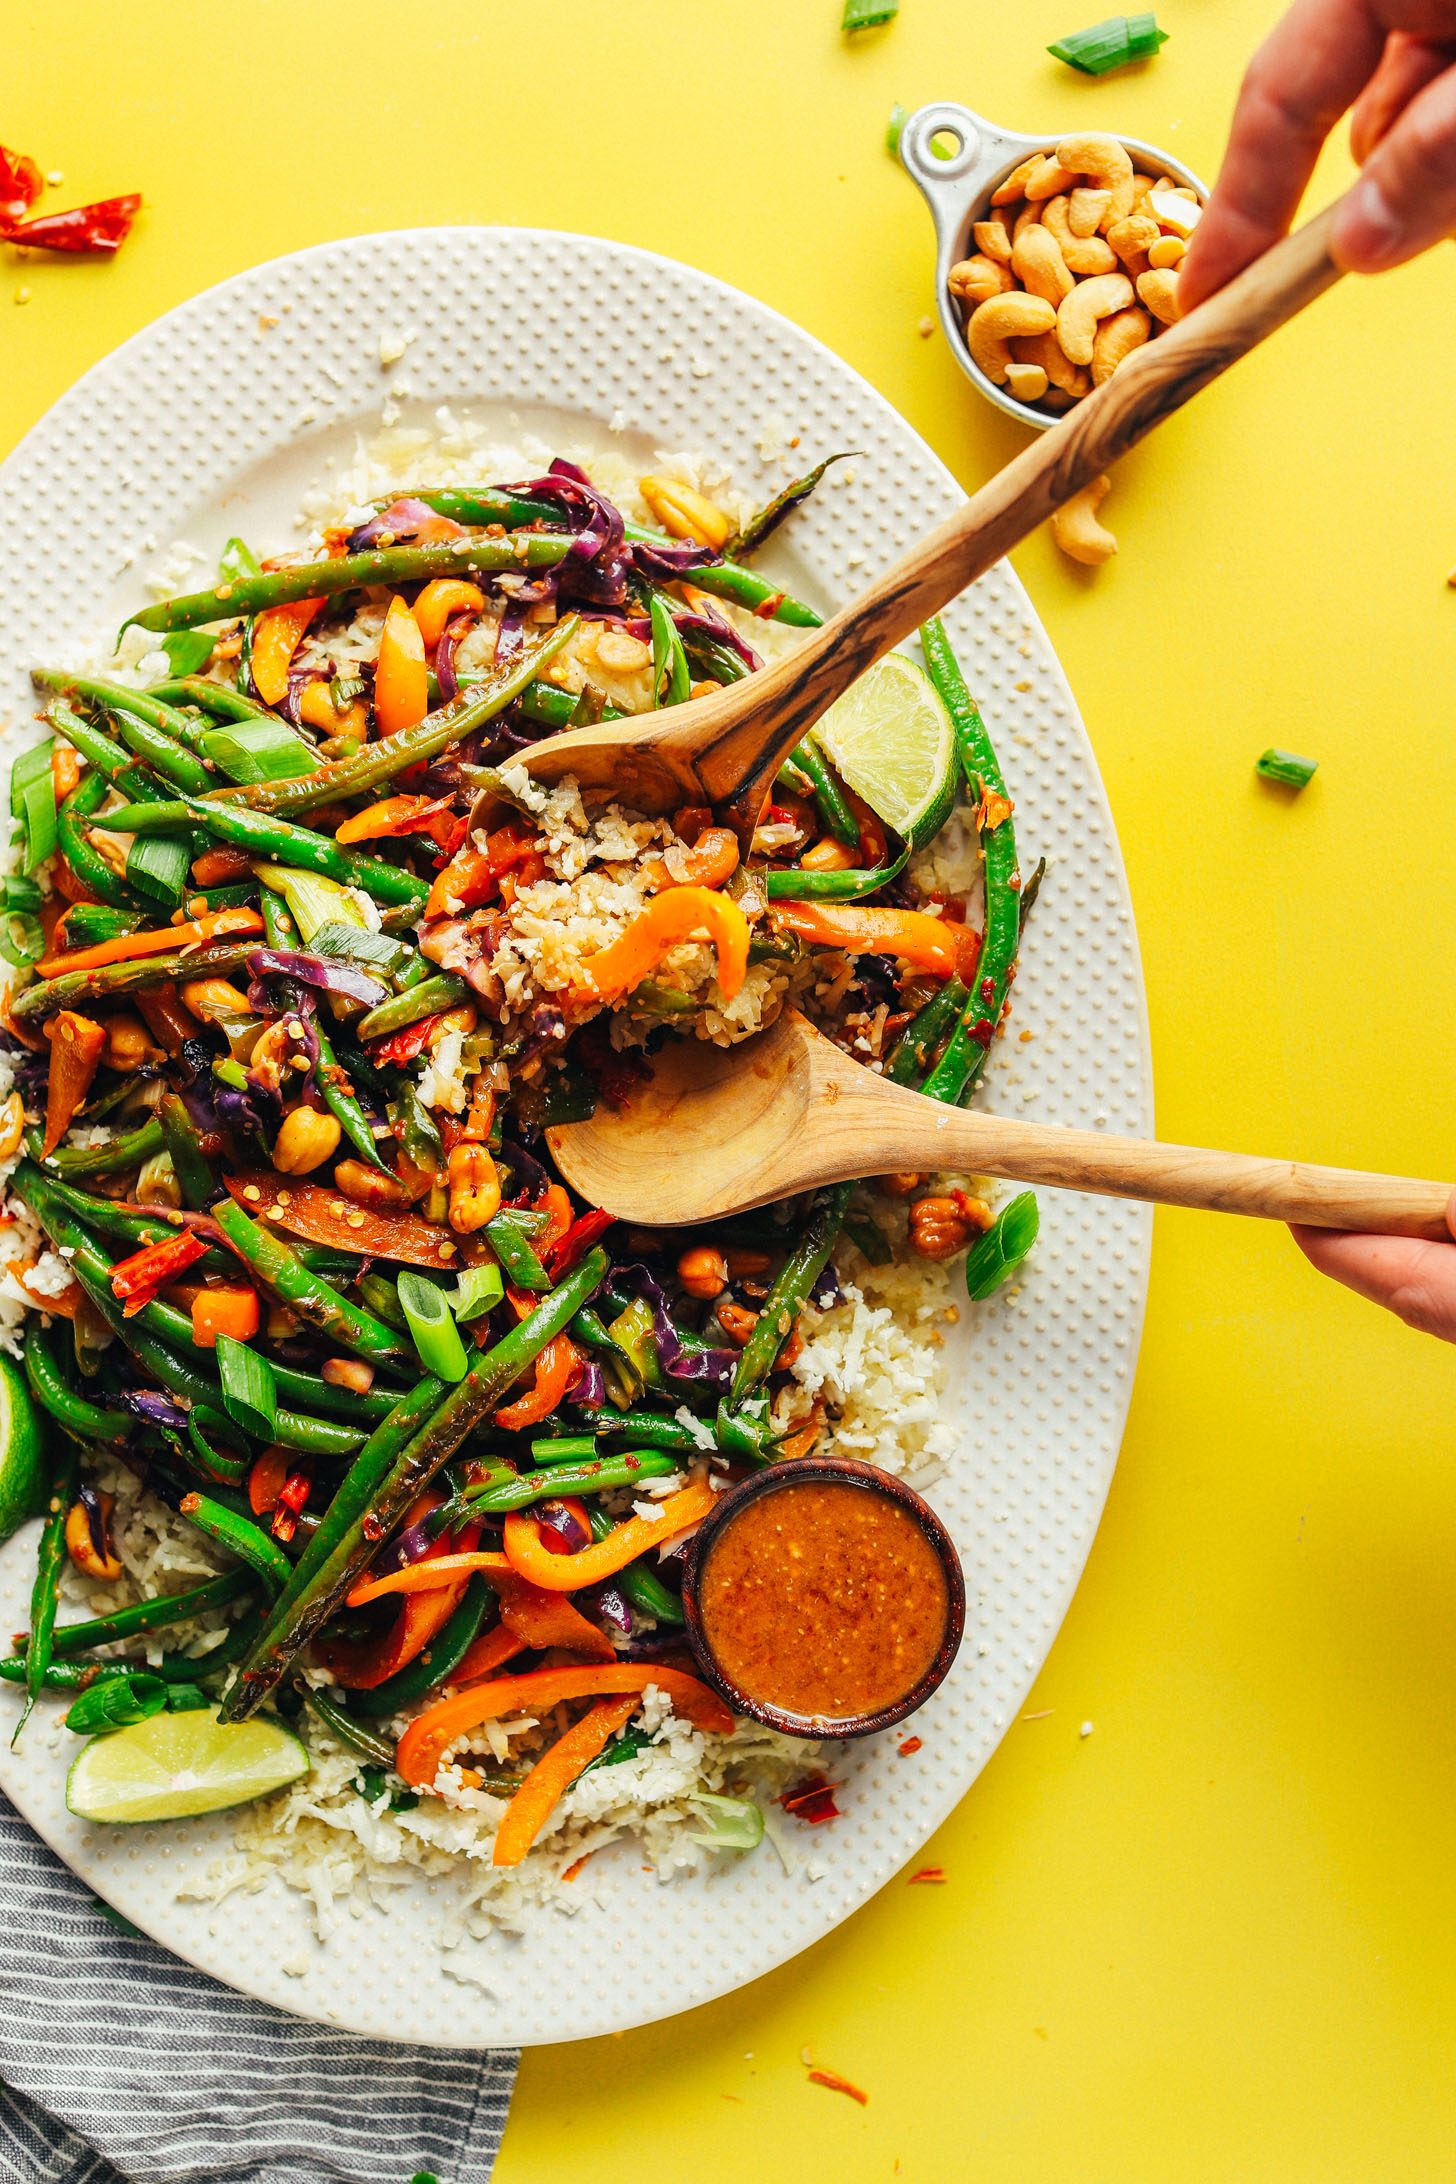 A large platter filled with a gluten-free plant-based meal of Cauliflower Rice Stir Fry